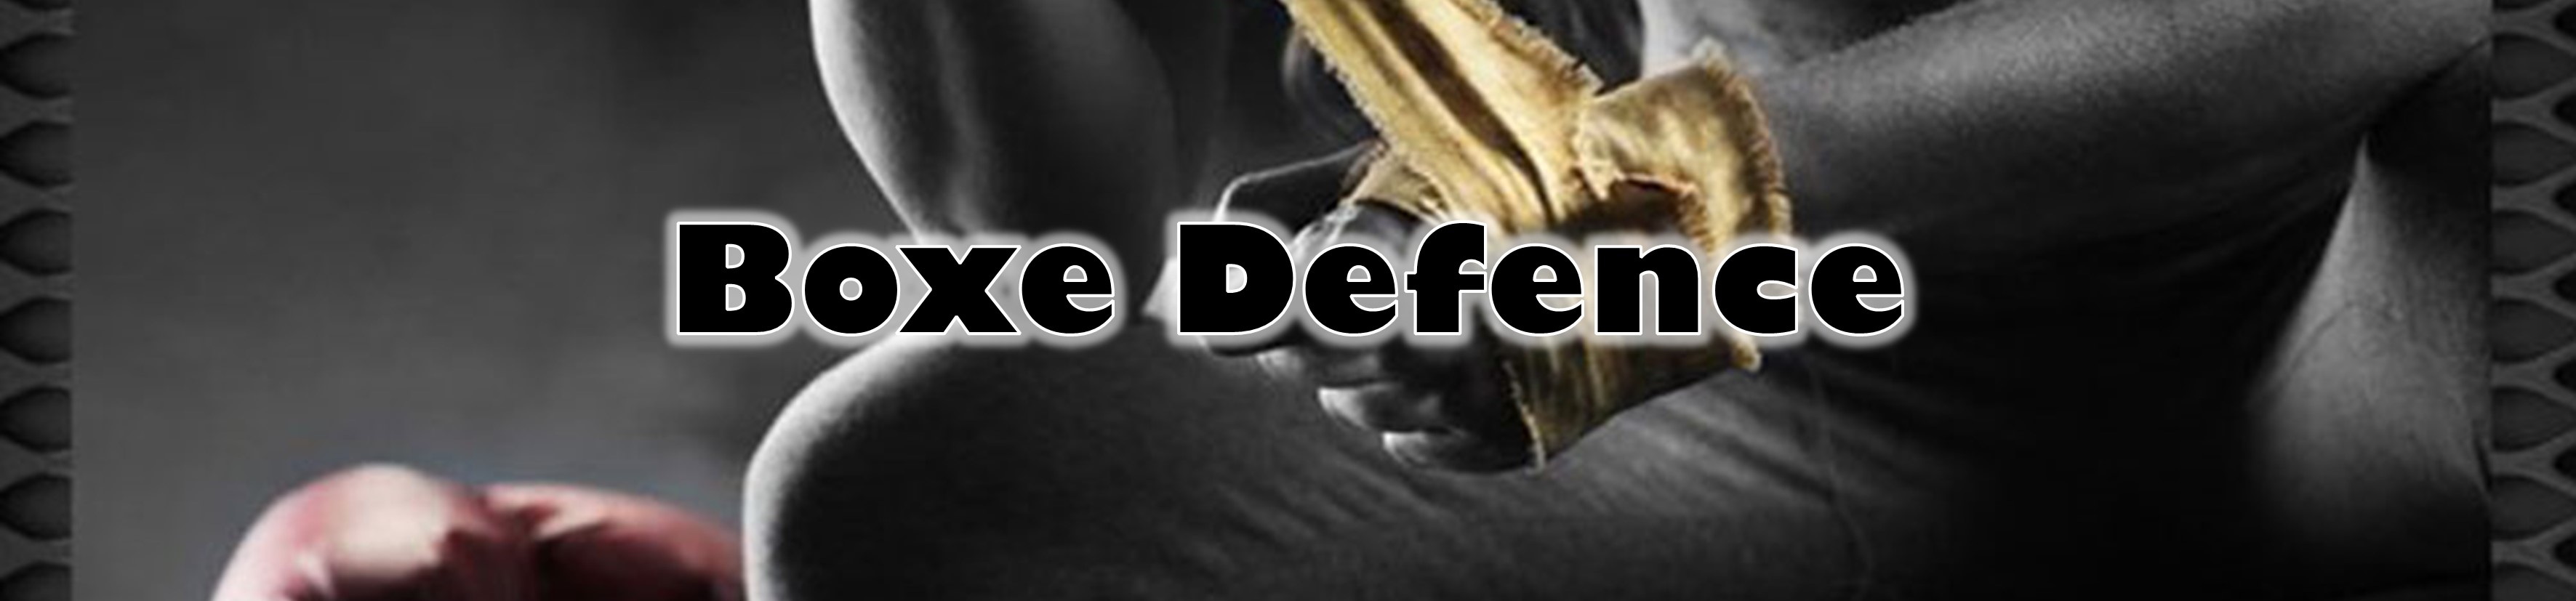 Boxe Defence